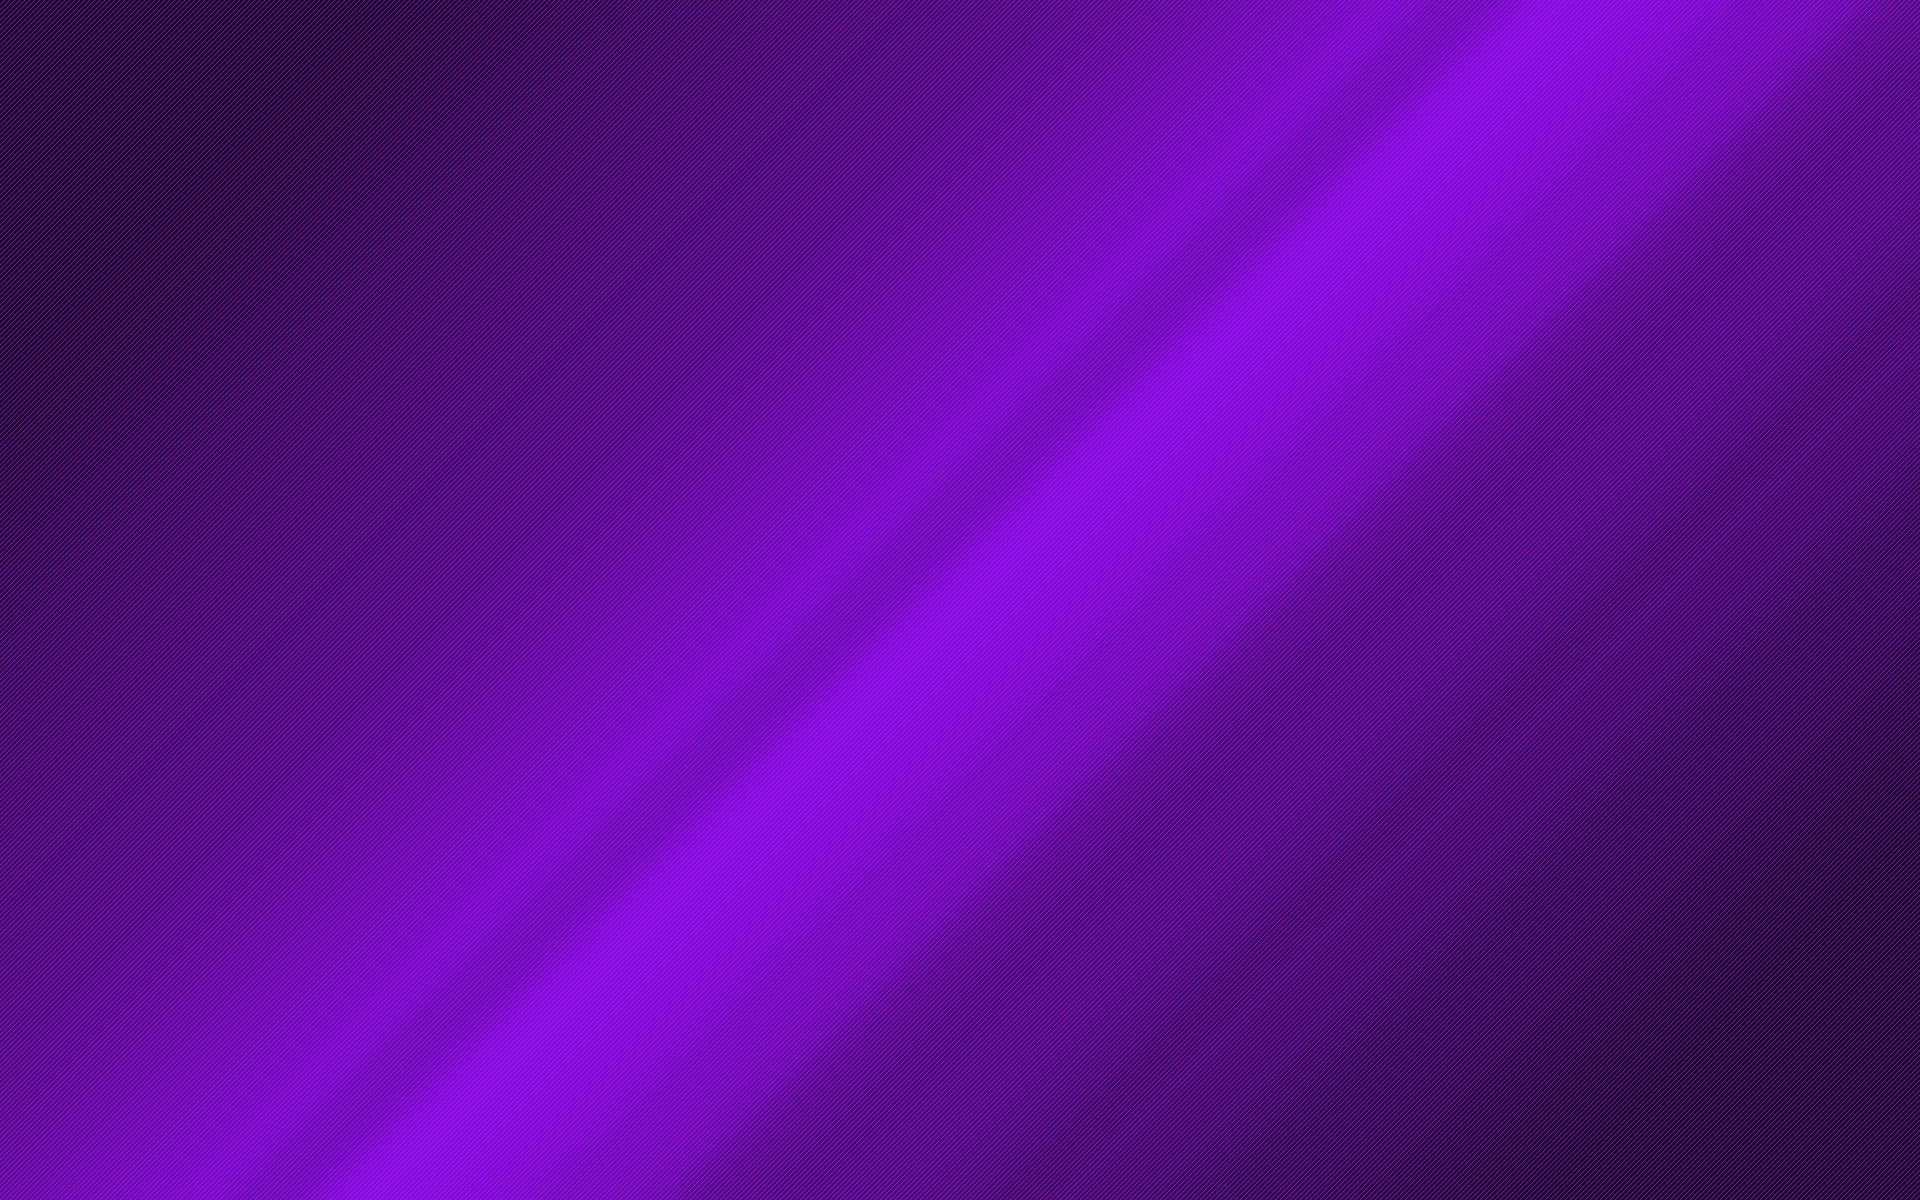 Wallpaper for mobile devices 